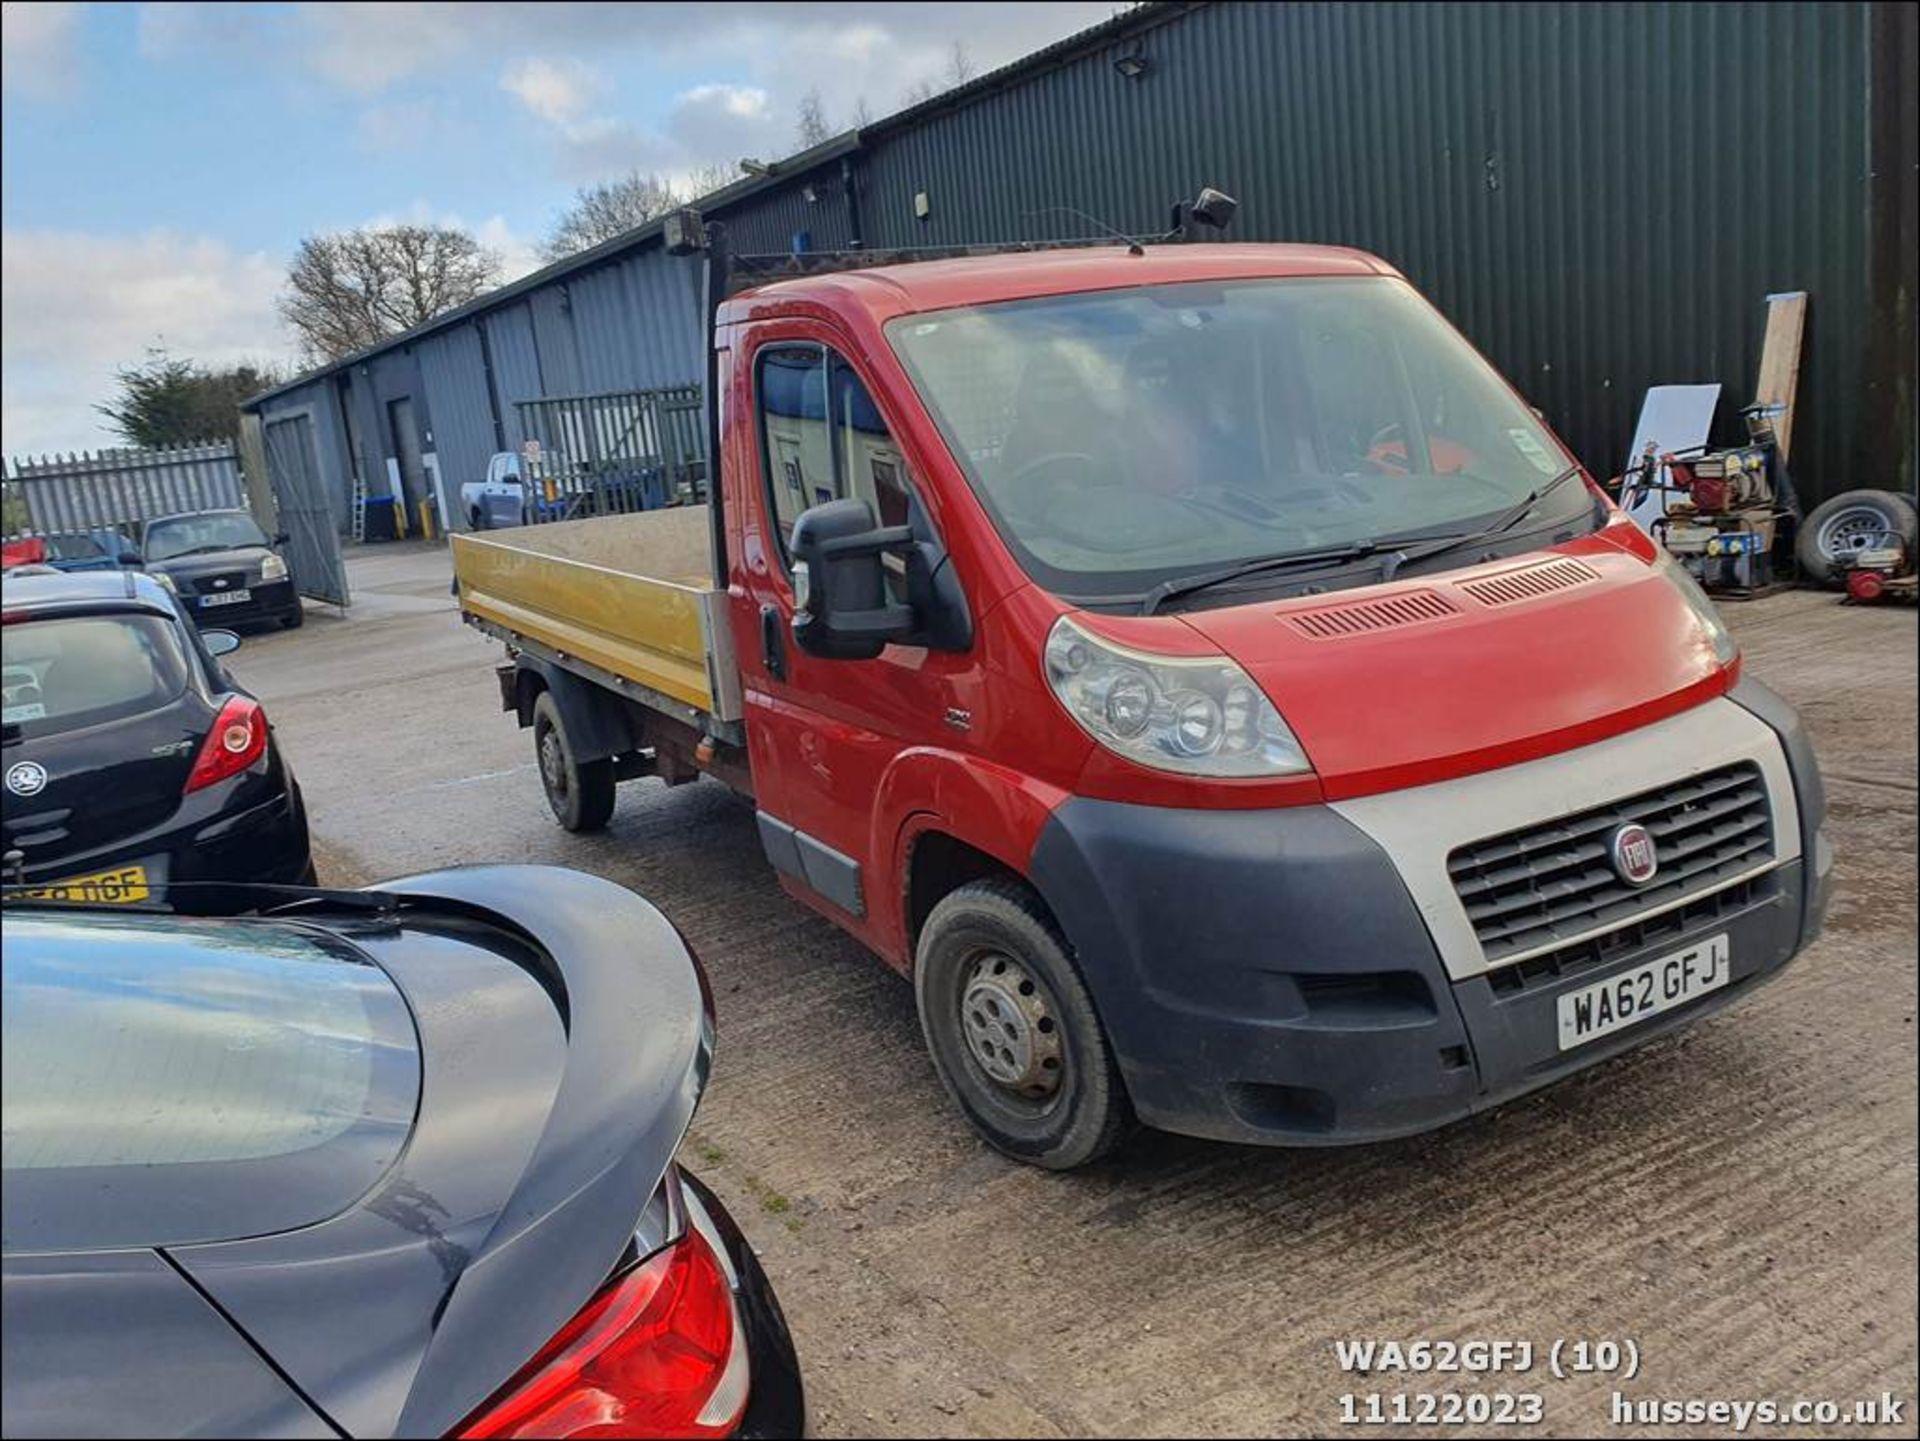 12/62 FIAT DUCATO 35 MULTIJET - 2287cc 2.dr Flat Bed (Red) - Image 11 of 52